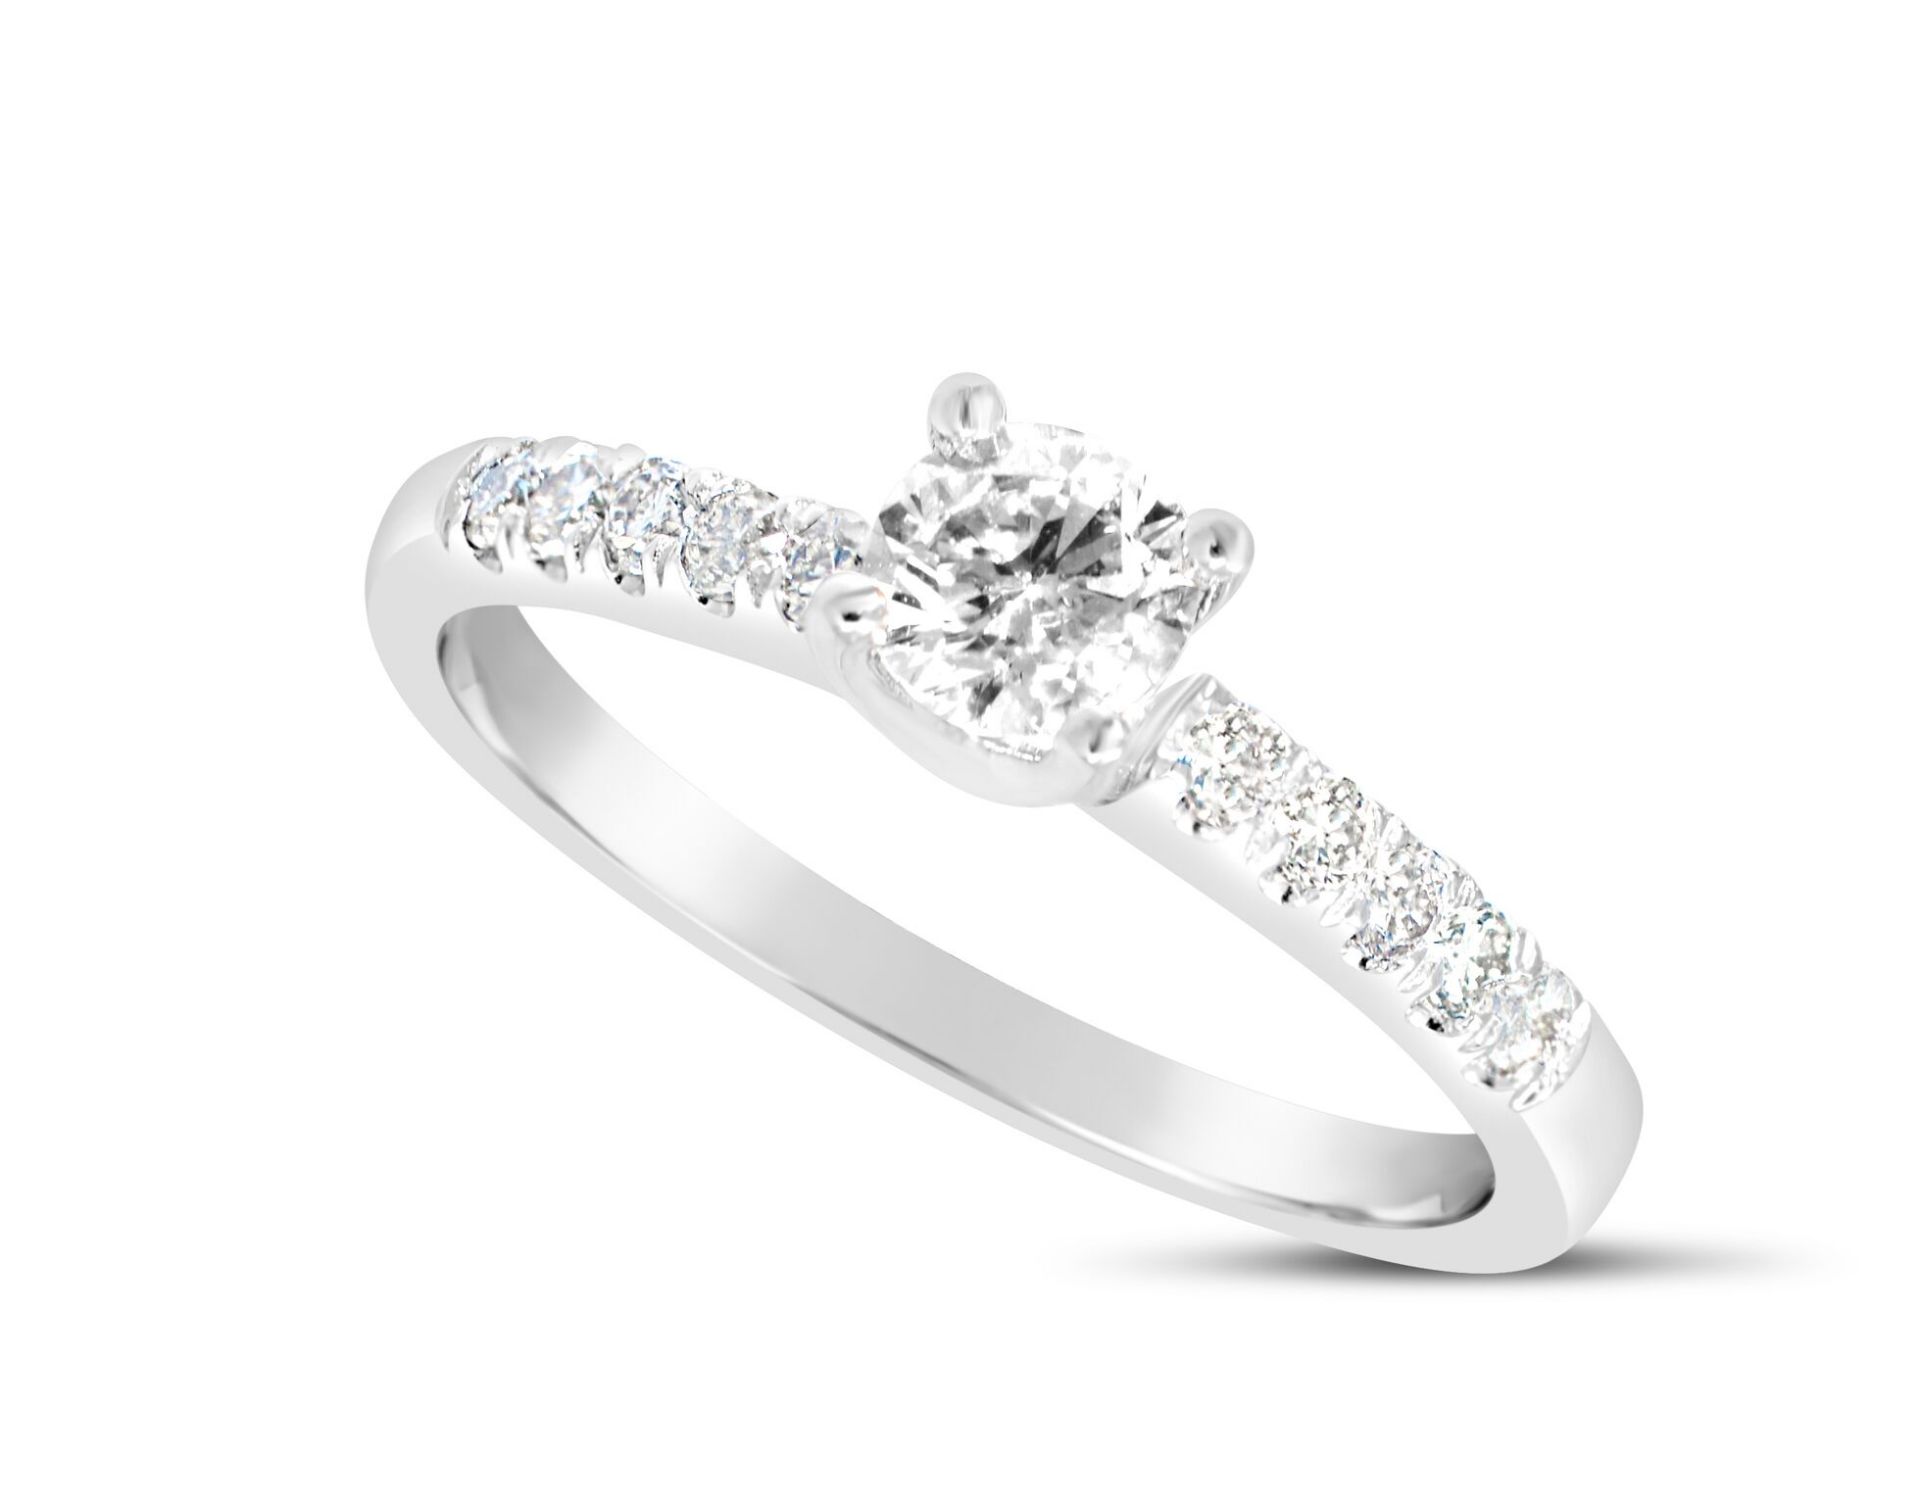 Solitaire diamond ring with diamonds on shoulder - Image 3 of 3